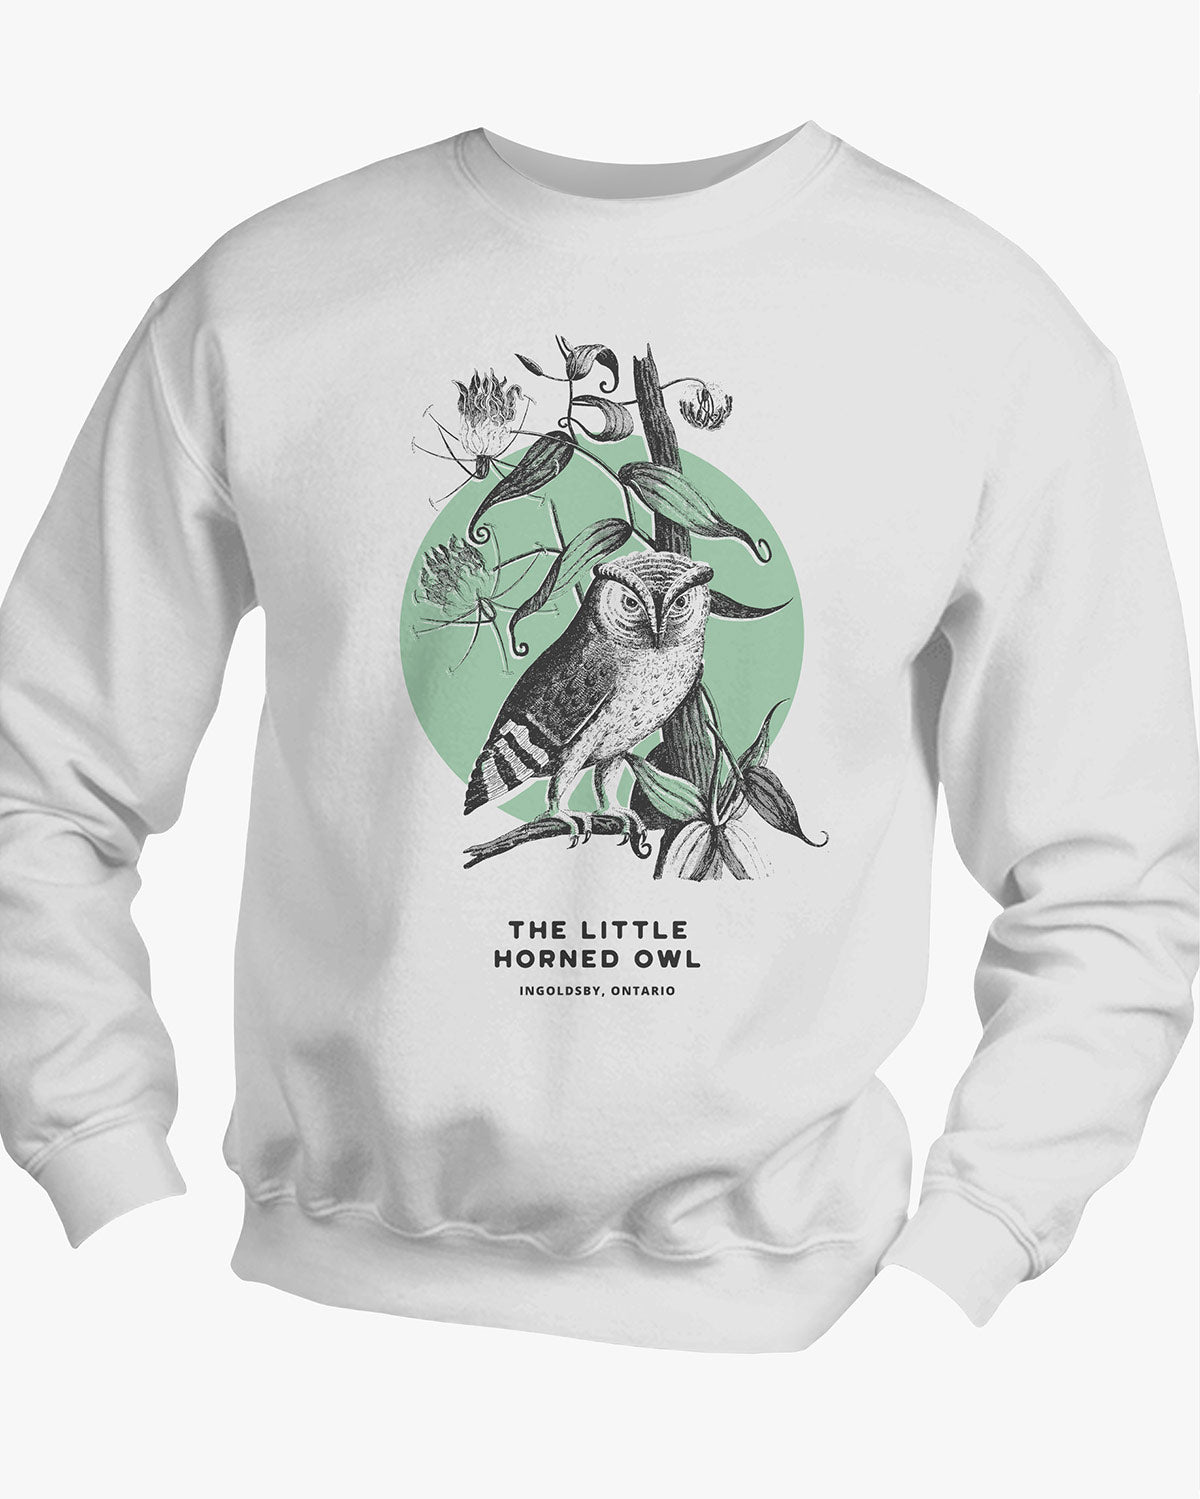 The Little Horned Owl - Ingoldsby - Sweater